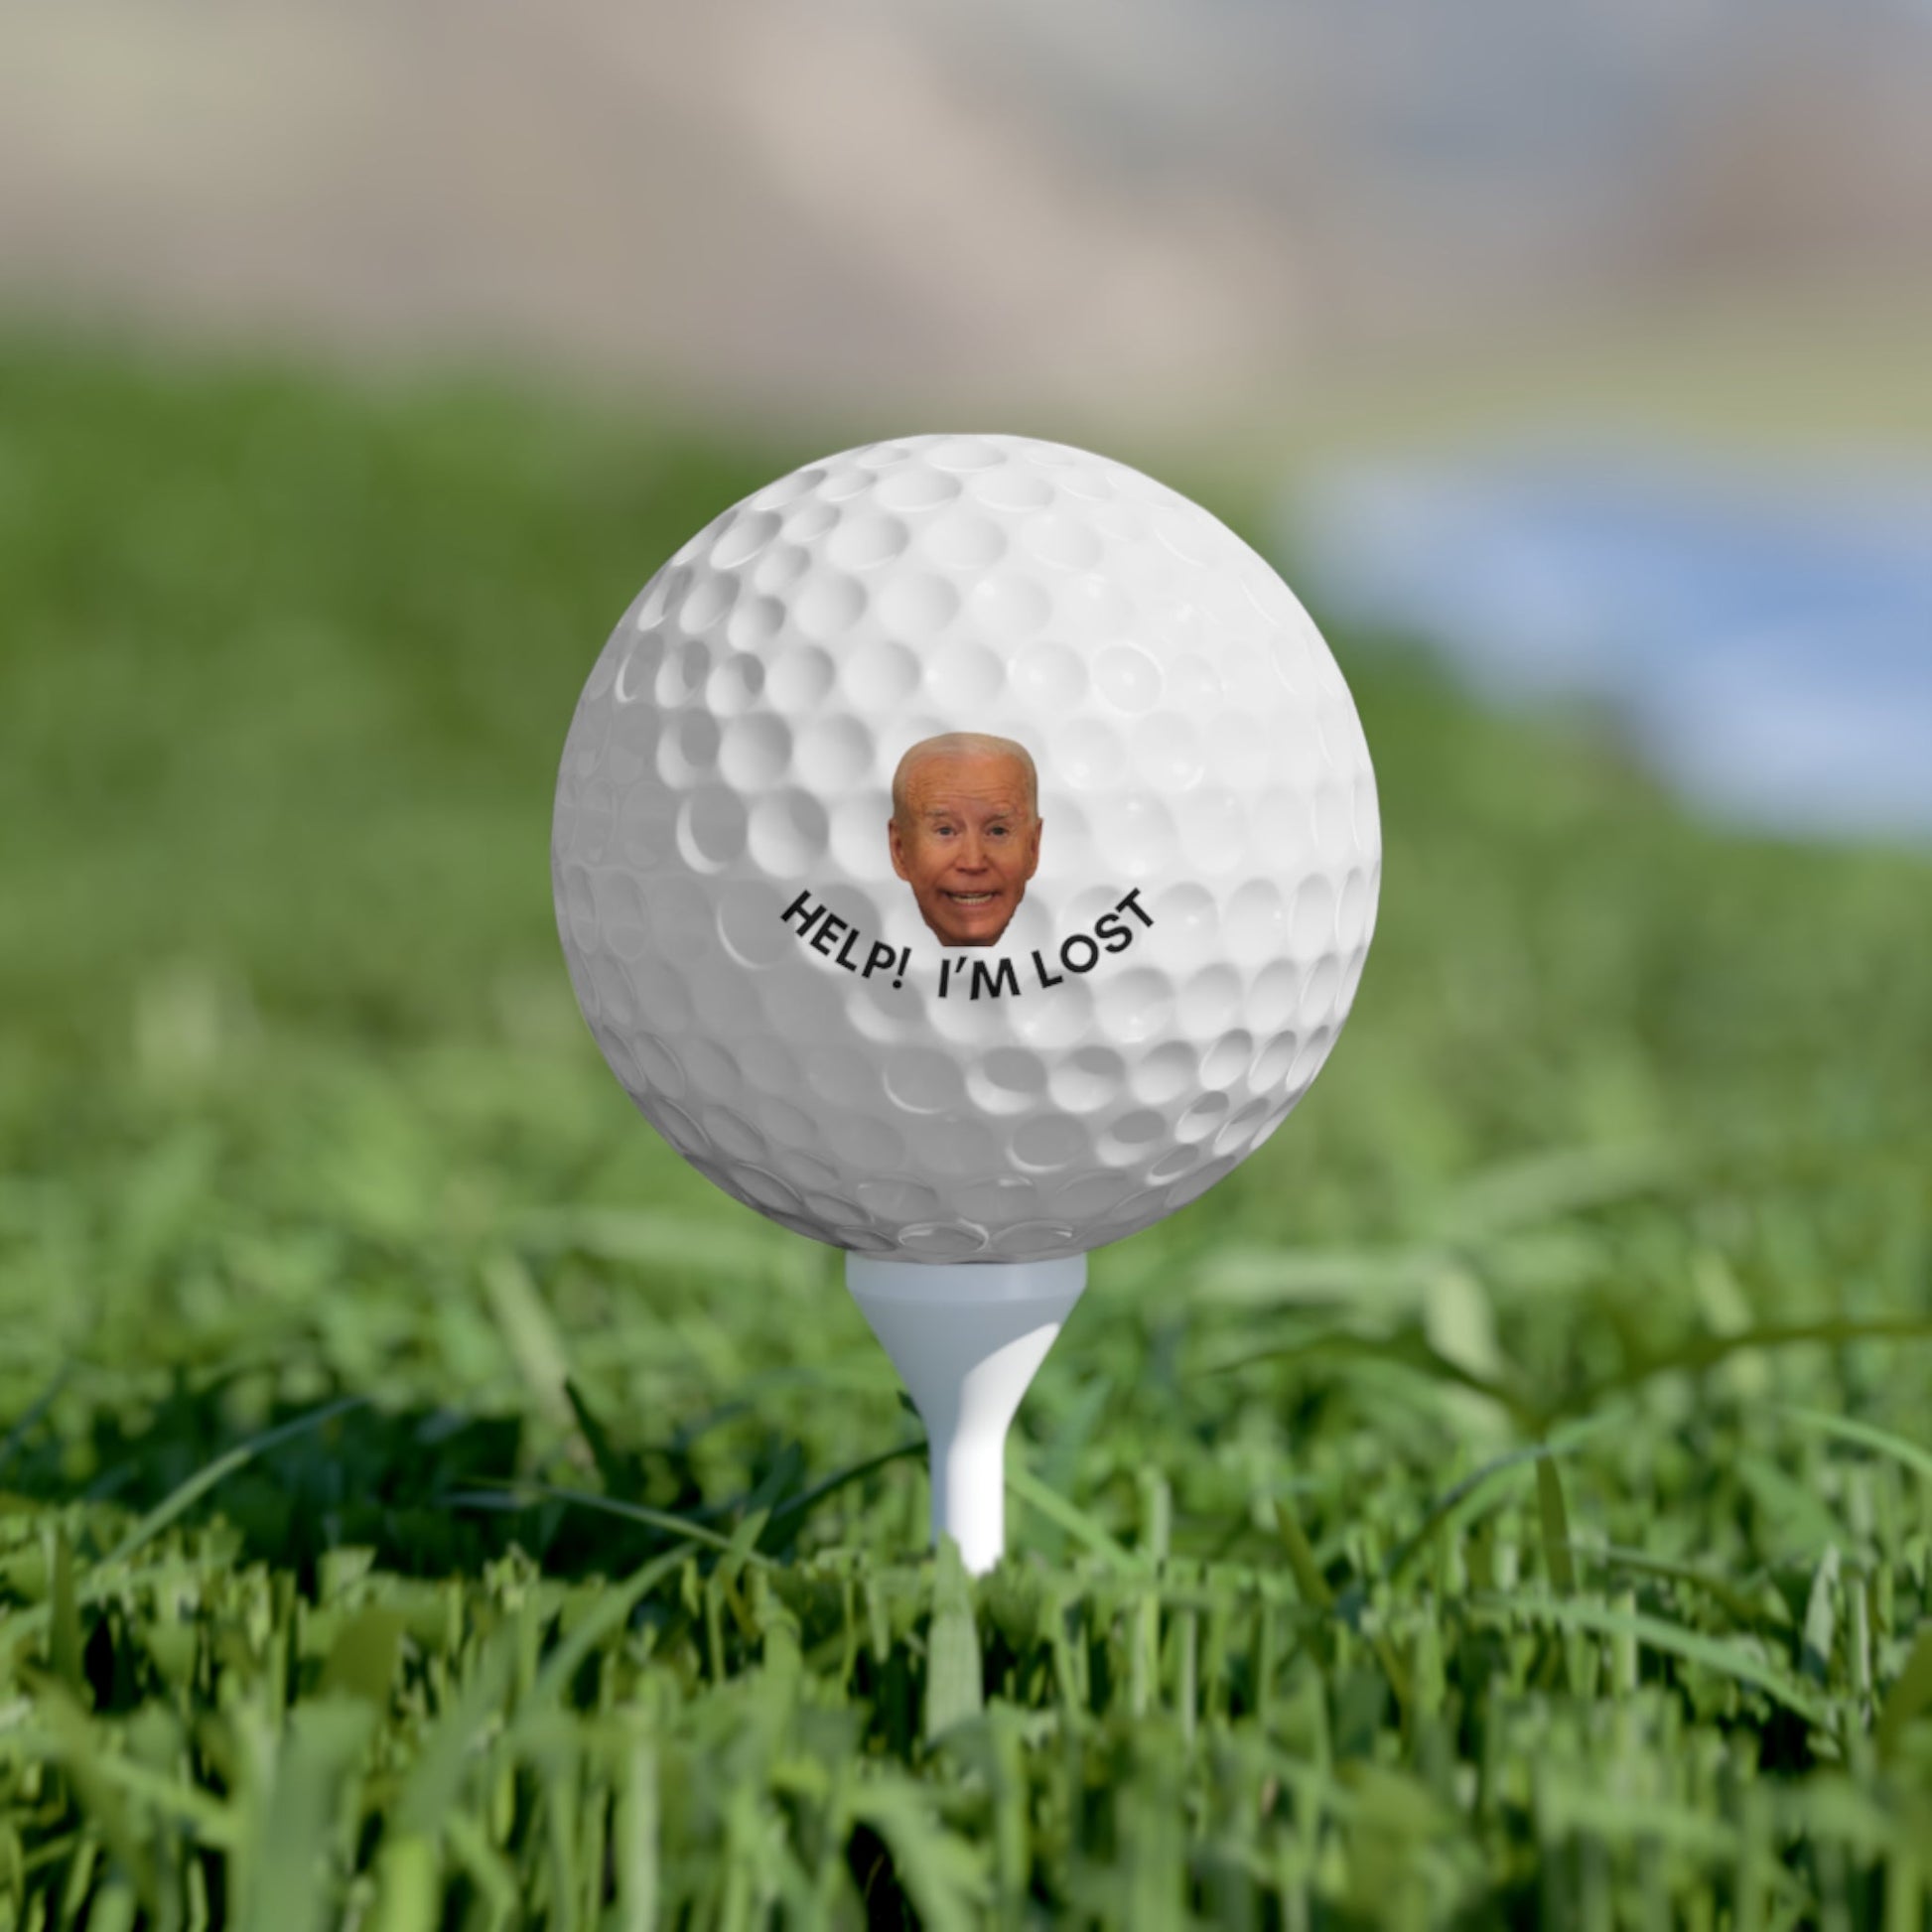 Get trendy with Help!  Lost Biden Golf balls - Accessories available at Good Gift Company. Grab yours for $25.38 today!